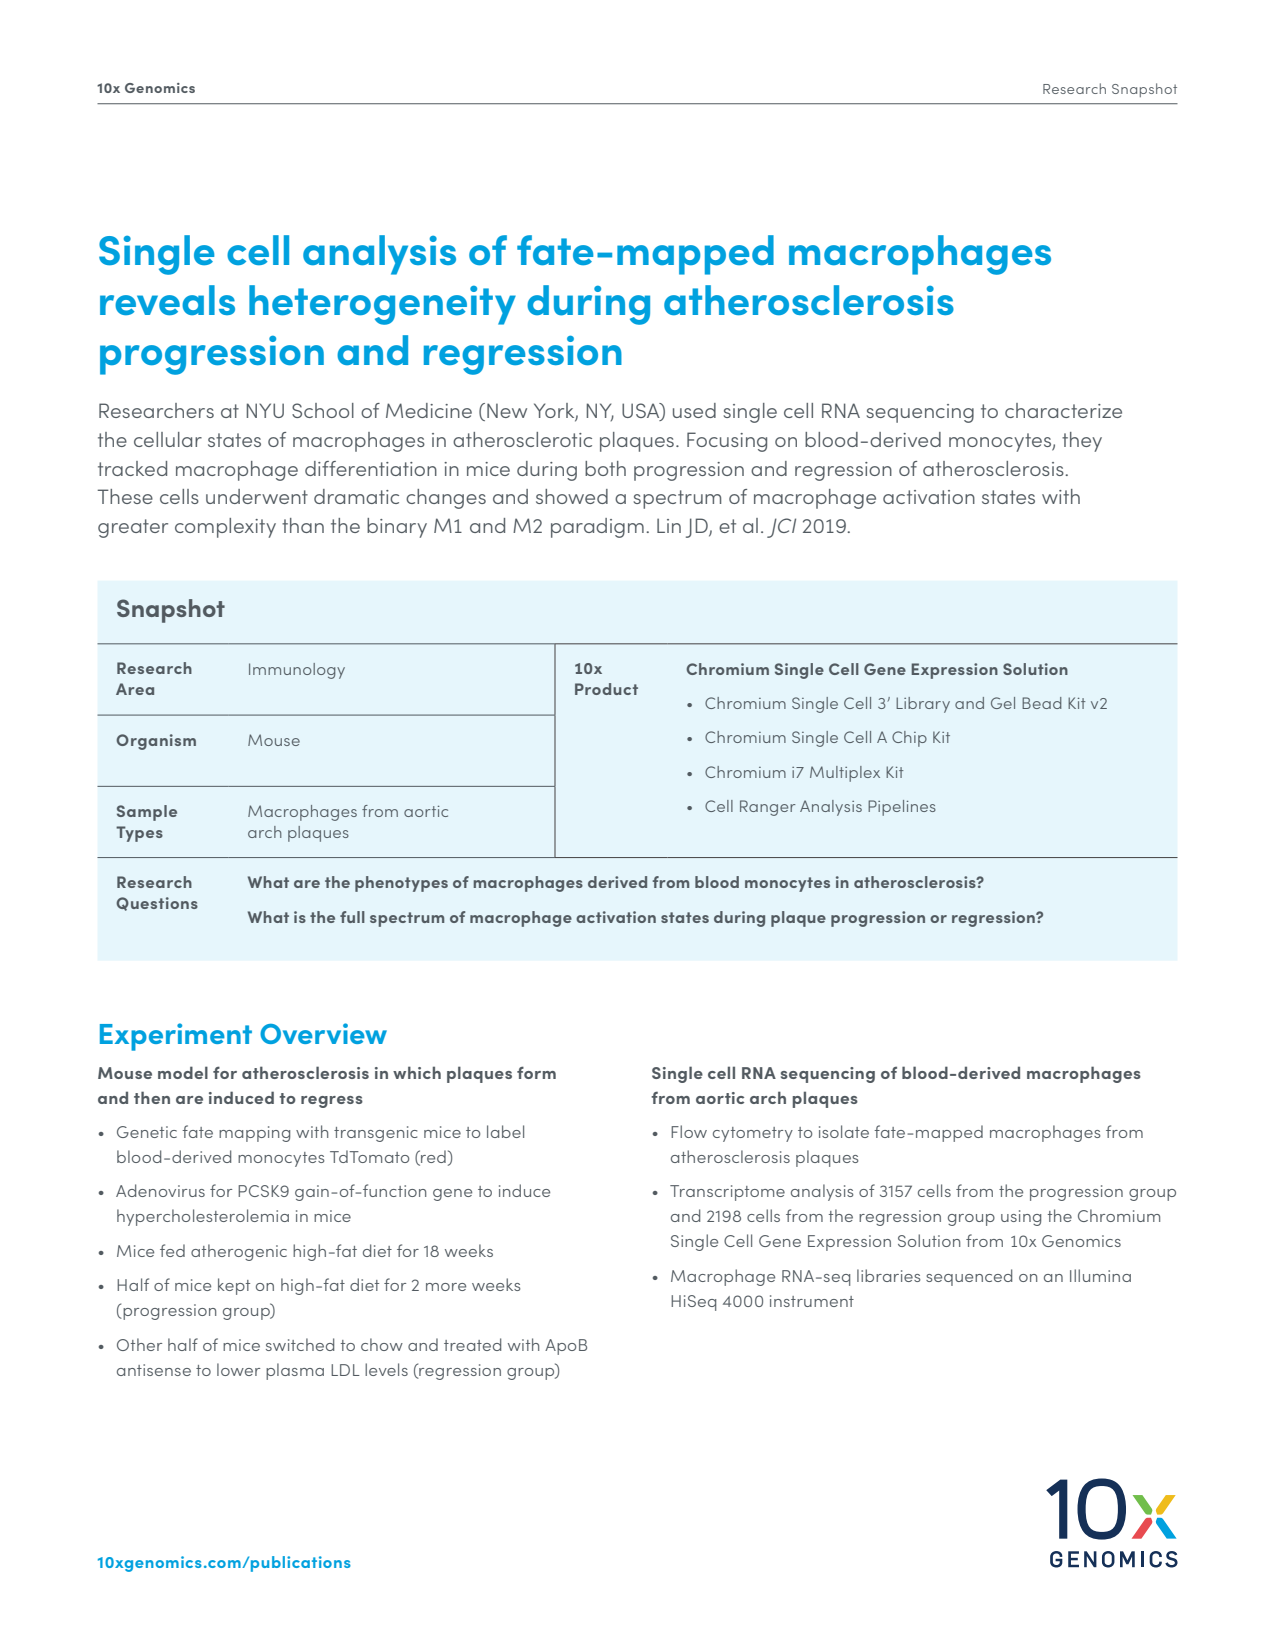 Single cell analysis of fate-mapped macrophages reveals heterogeneity during atherosclerosis progression and regression